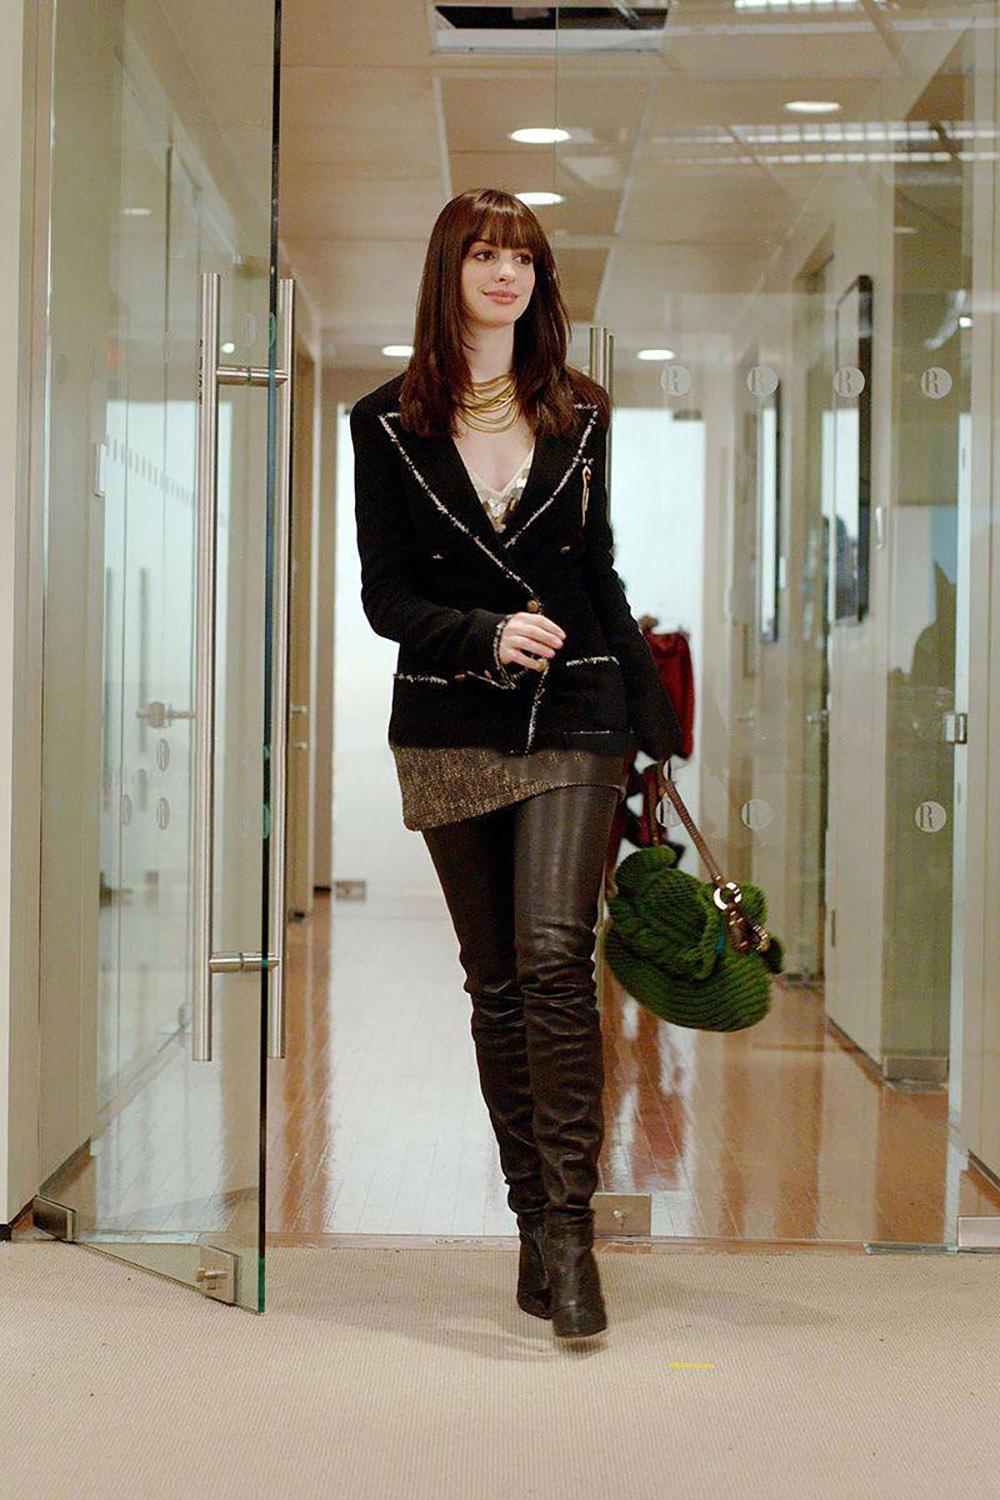 Most hunted Chanel dark navy tweed jacket with CC Perfume no 5 Bottle Patch -- as seen in movie Devil Wears Prada.
Size mark 44 FR, condition is pristine, no visible sings of wear.
Caught on many celebs, a must-have vintage Chanel jacket!
- CC logo